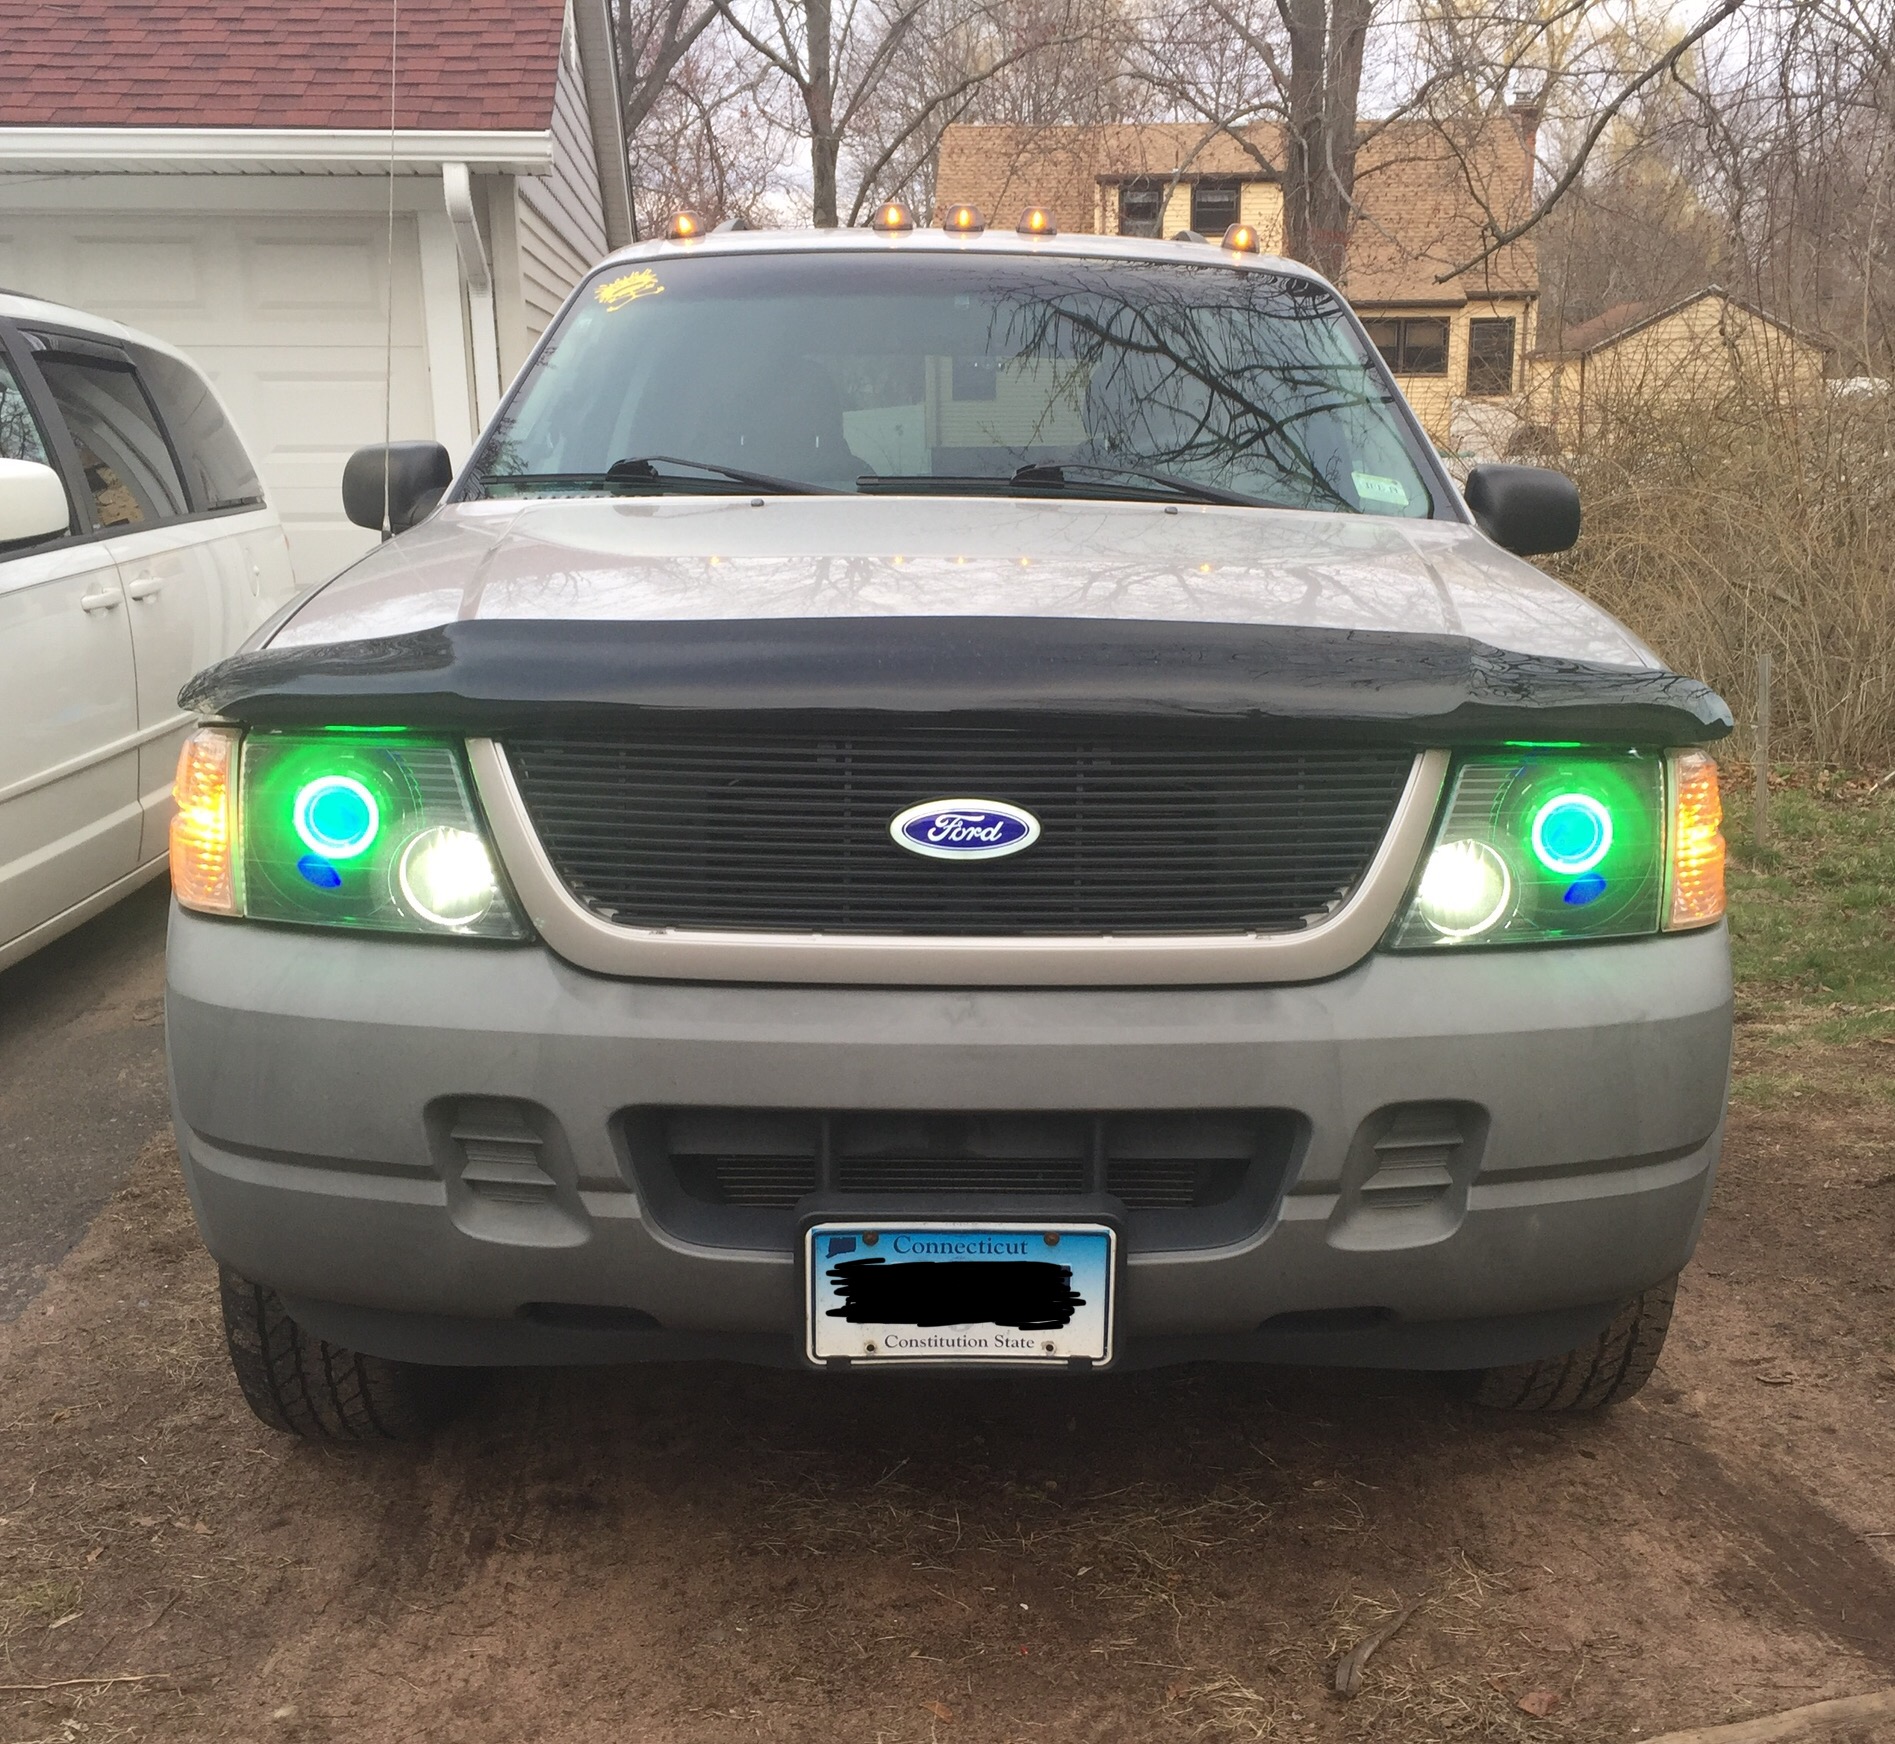 DRL with Demon Eyes